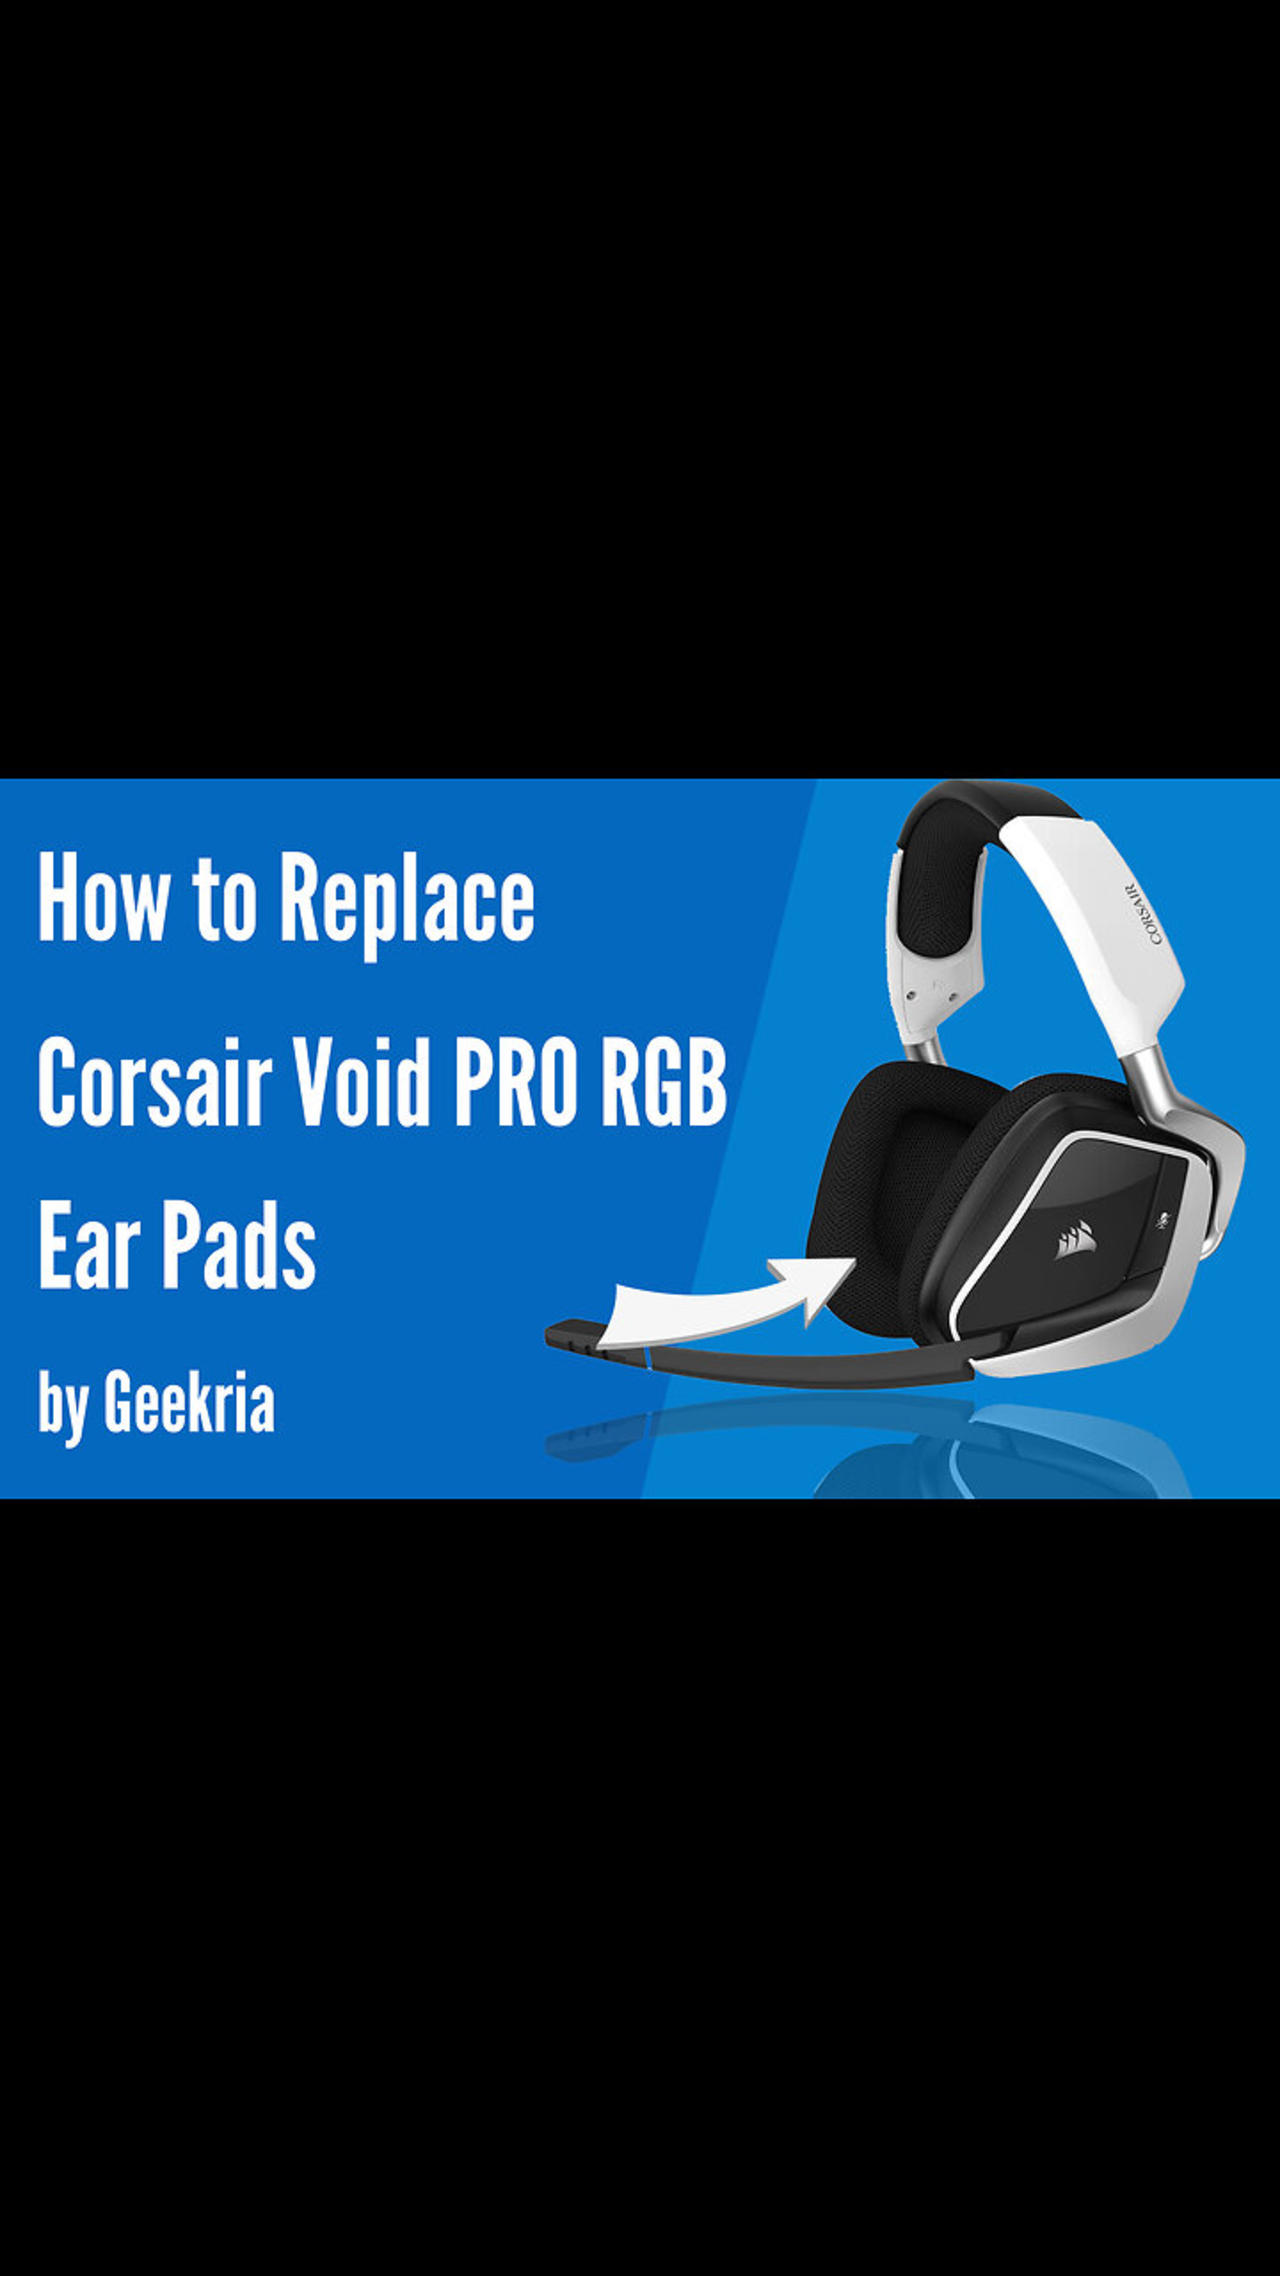 How to Replace Corsair Void Pro RGB Headphones Ear Pads / Cushions | Geekria